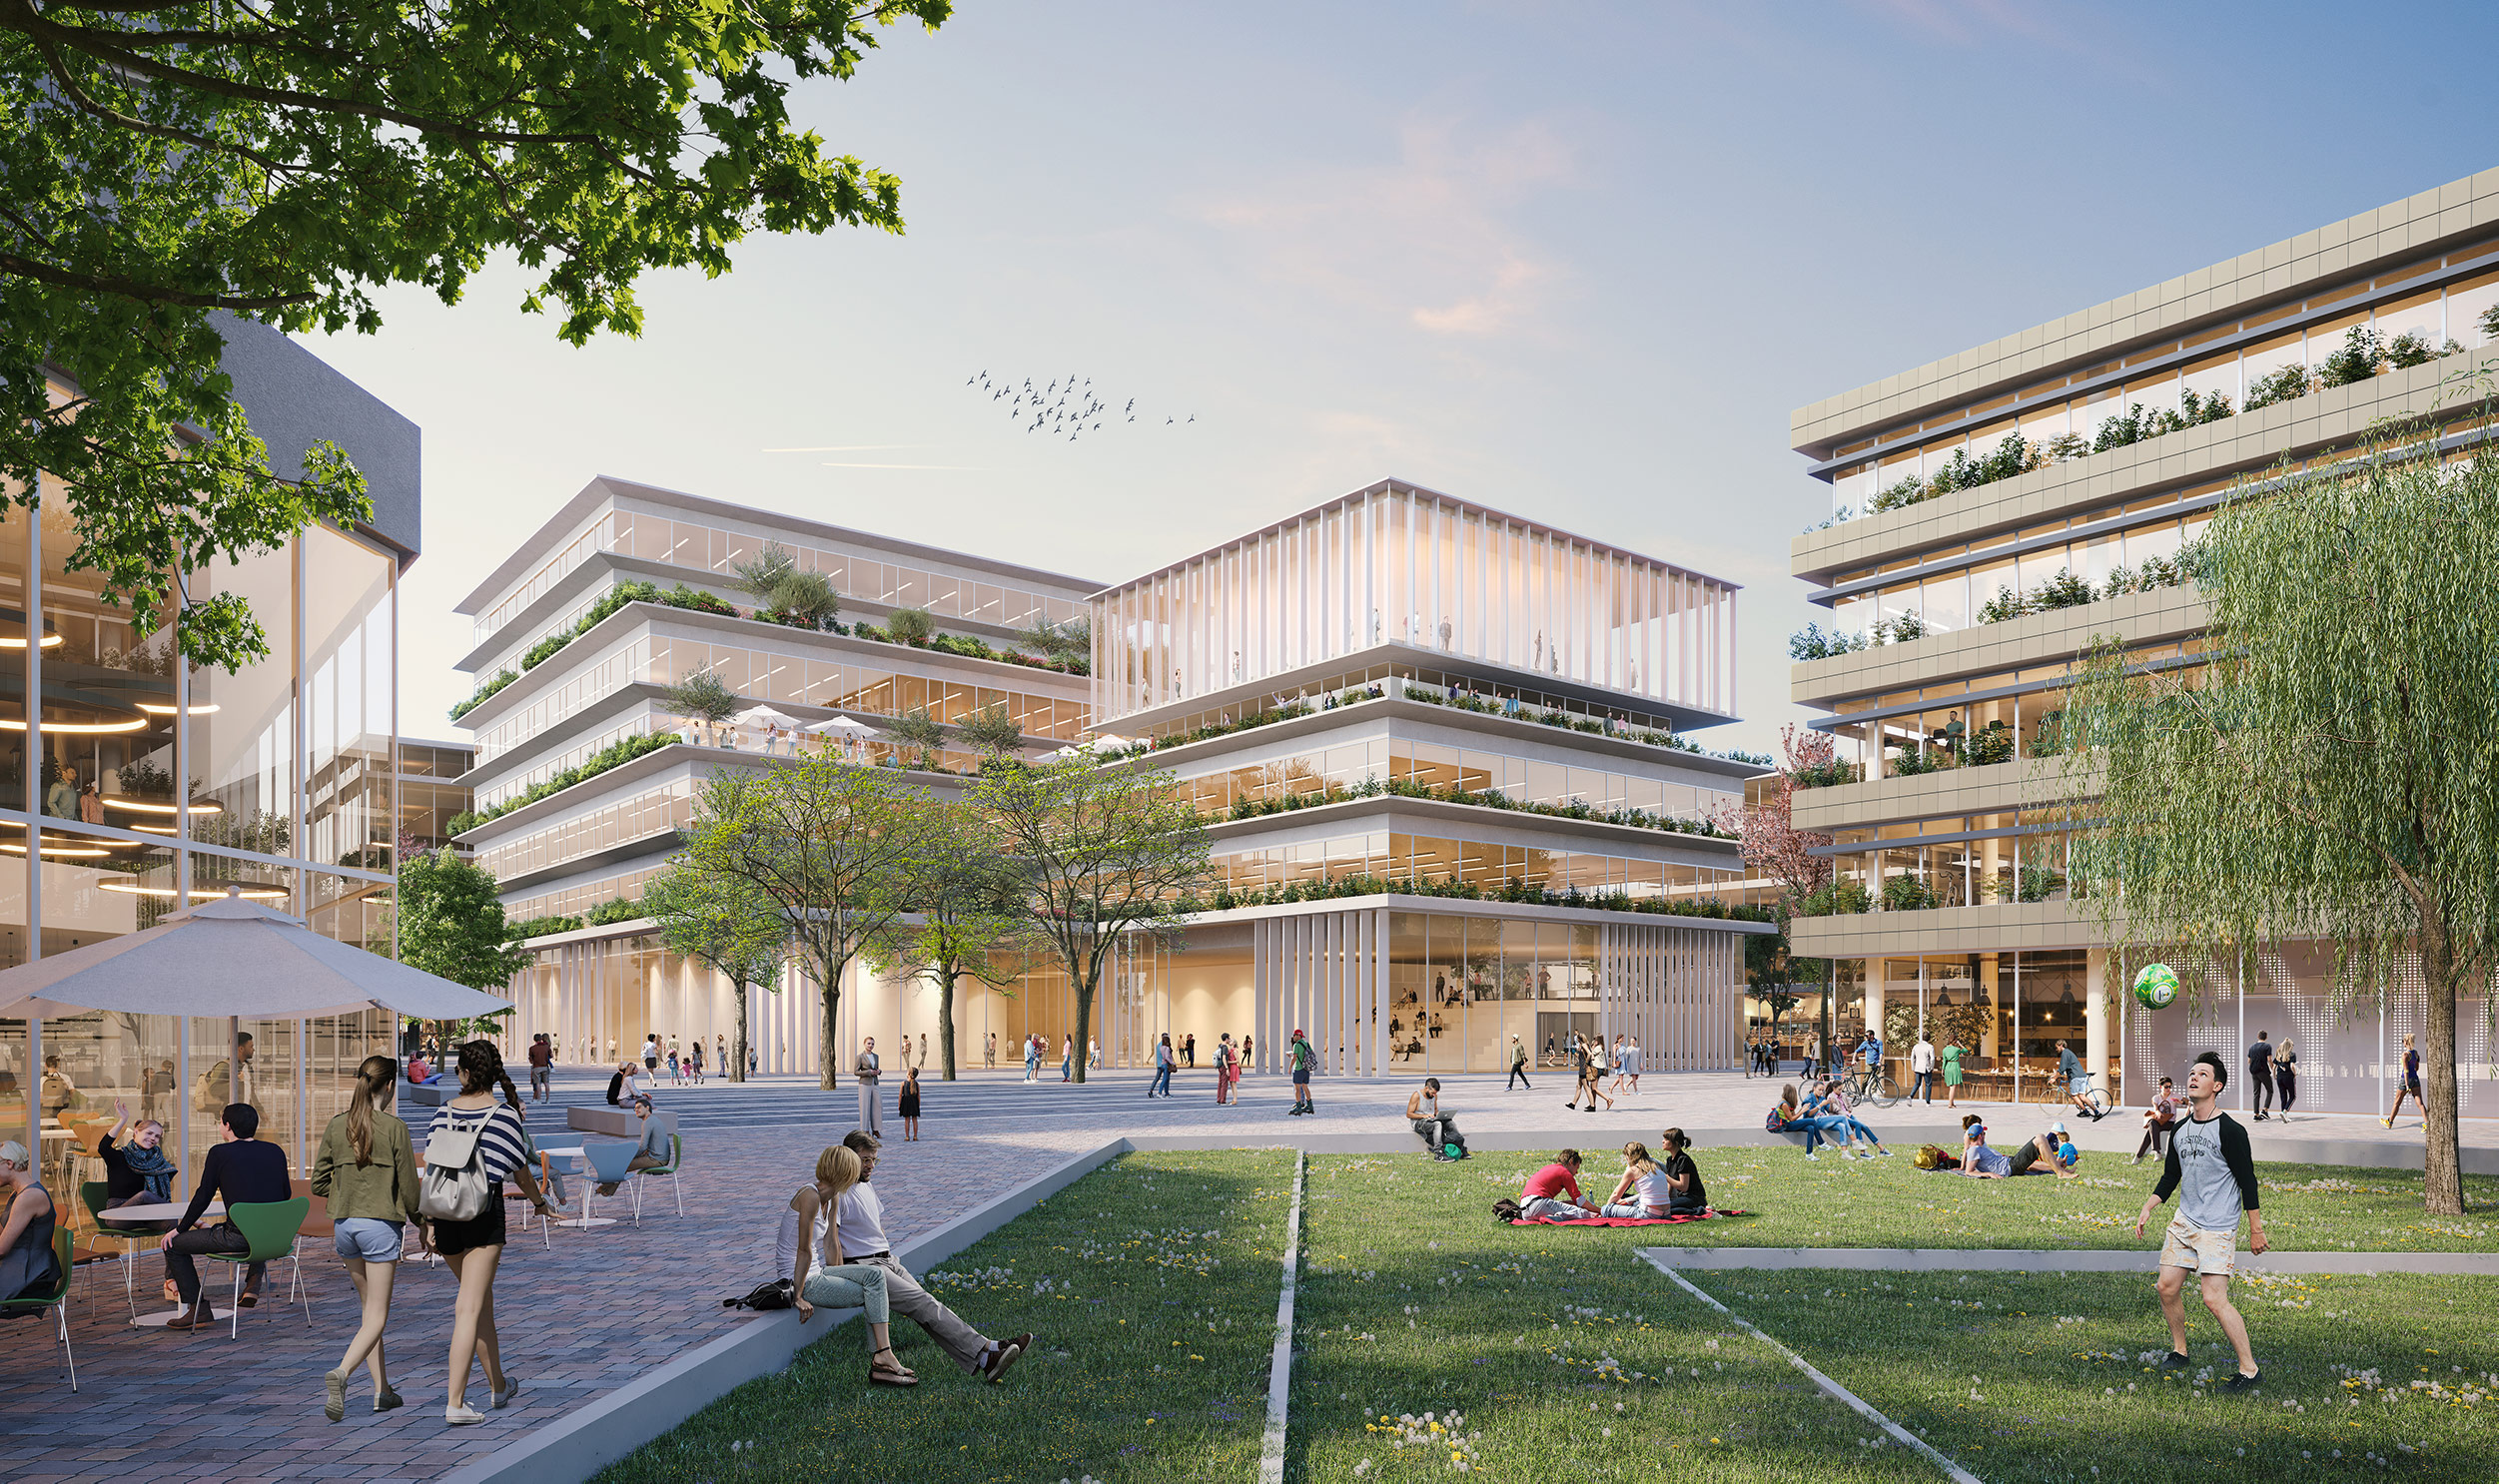 Visualization of the new campus in Heilbronn